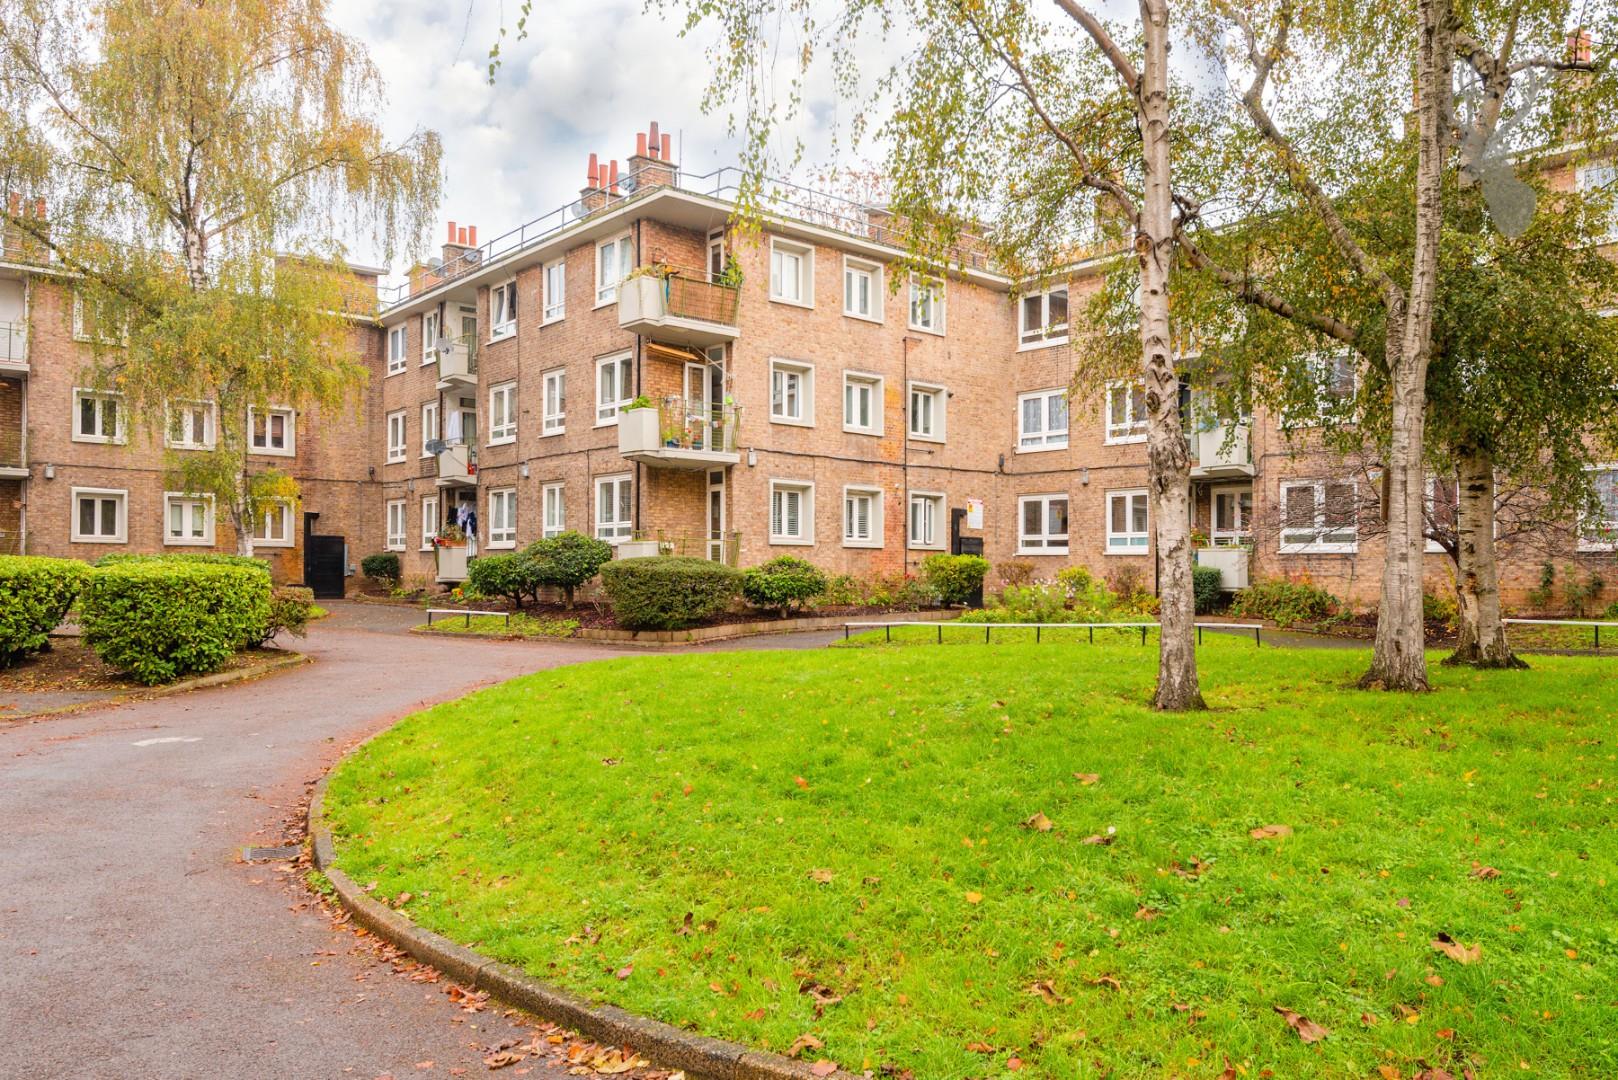 Similar Property: Flat - First Floor in Victoria Park